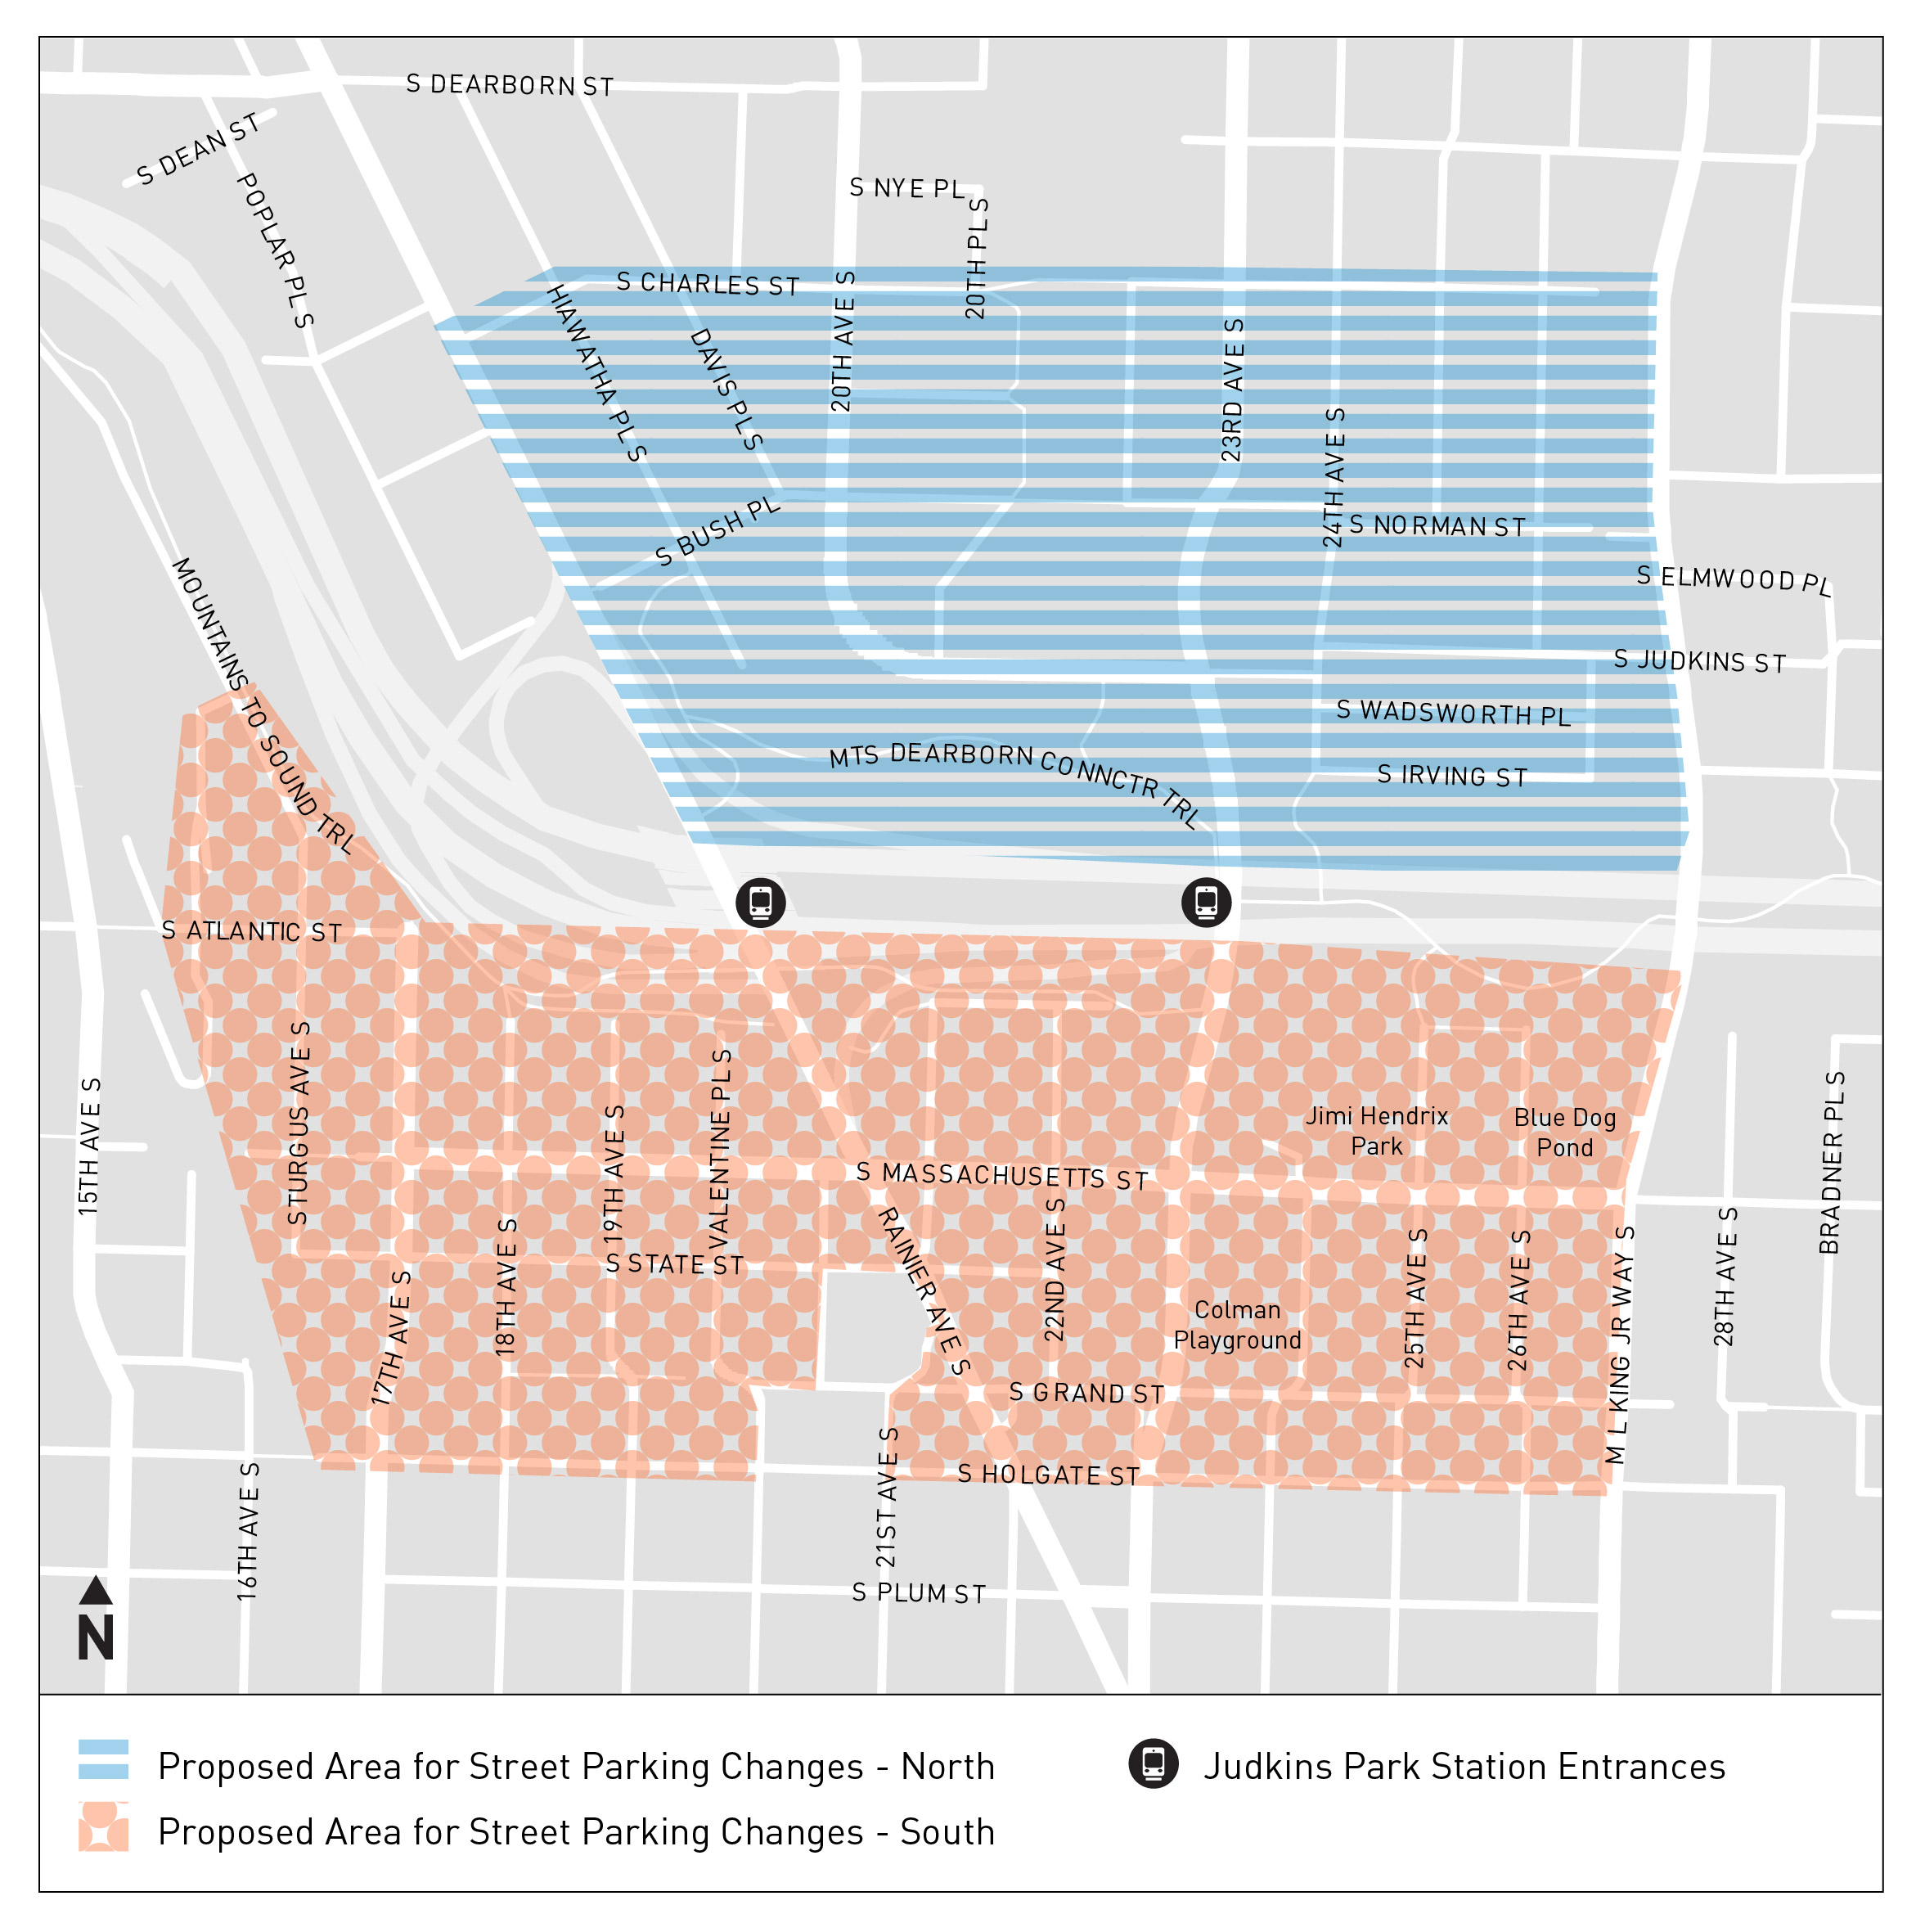 Map depicting two proposed areas for changes to street parking around the future Judkins Park Light Rail Station: one area north of I-90 and one area south of I-90.